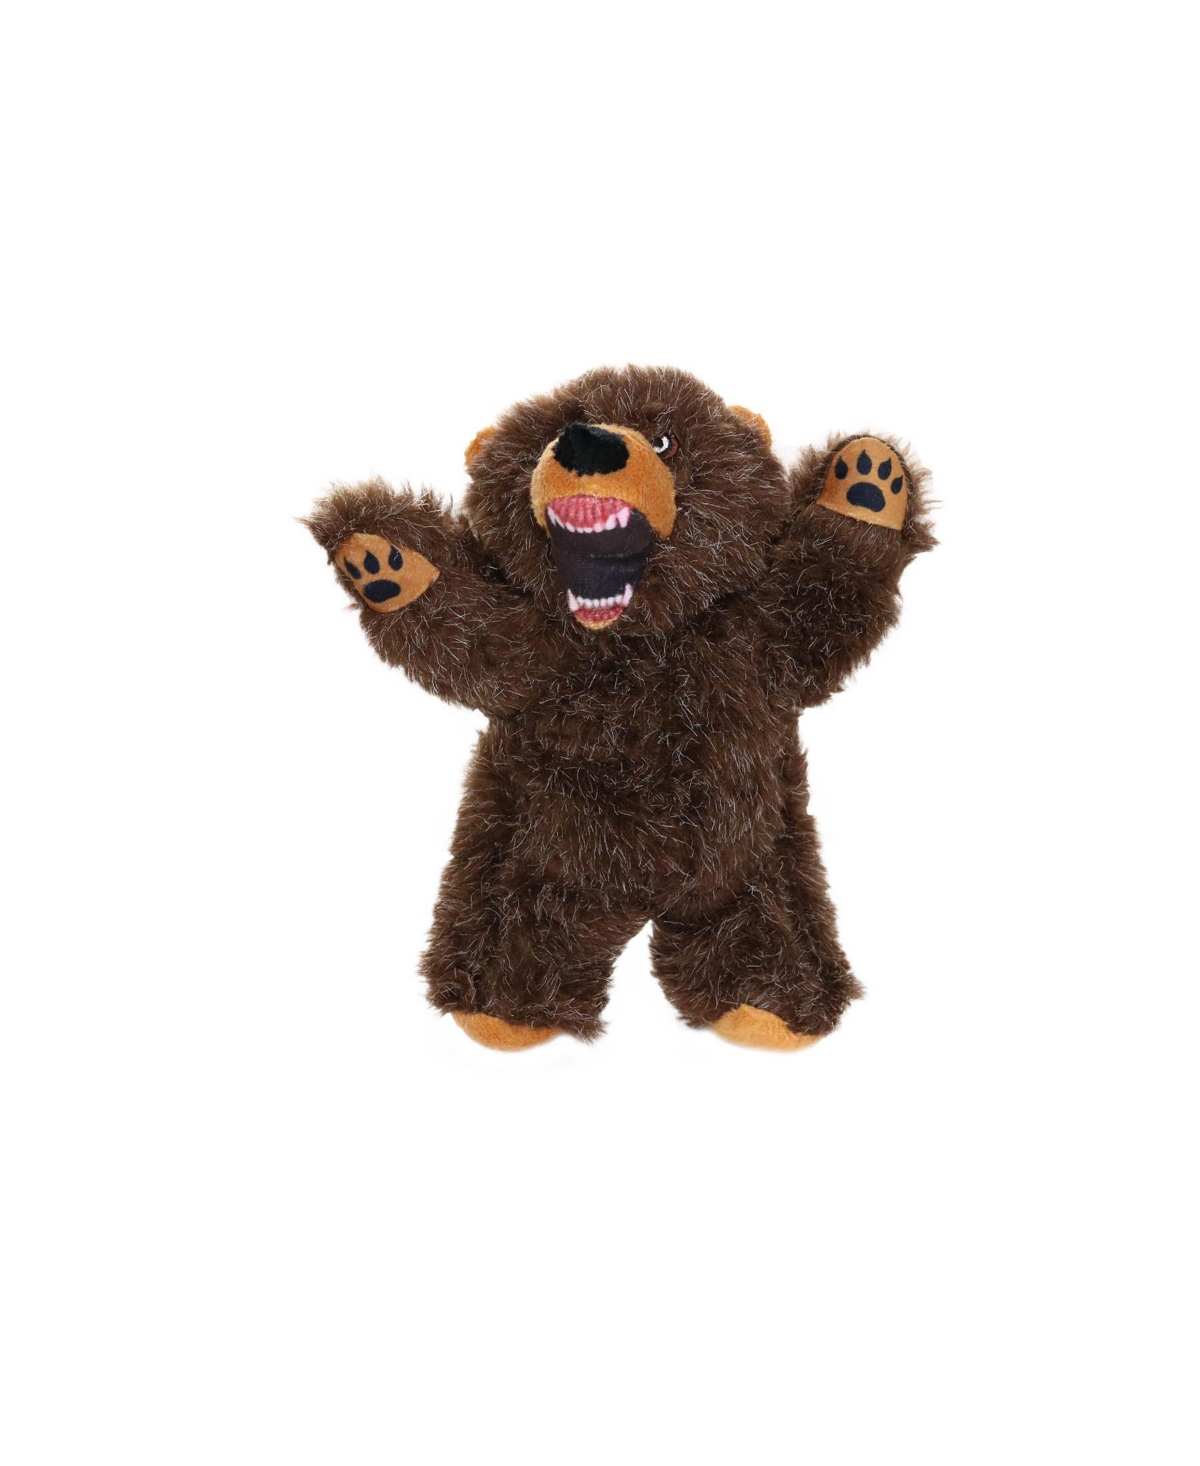 Jr Angry Animals Bear, Dog Toy - Brown